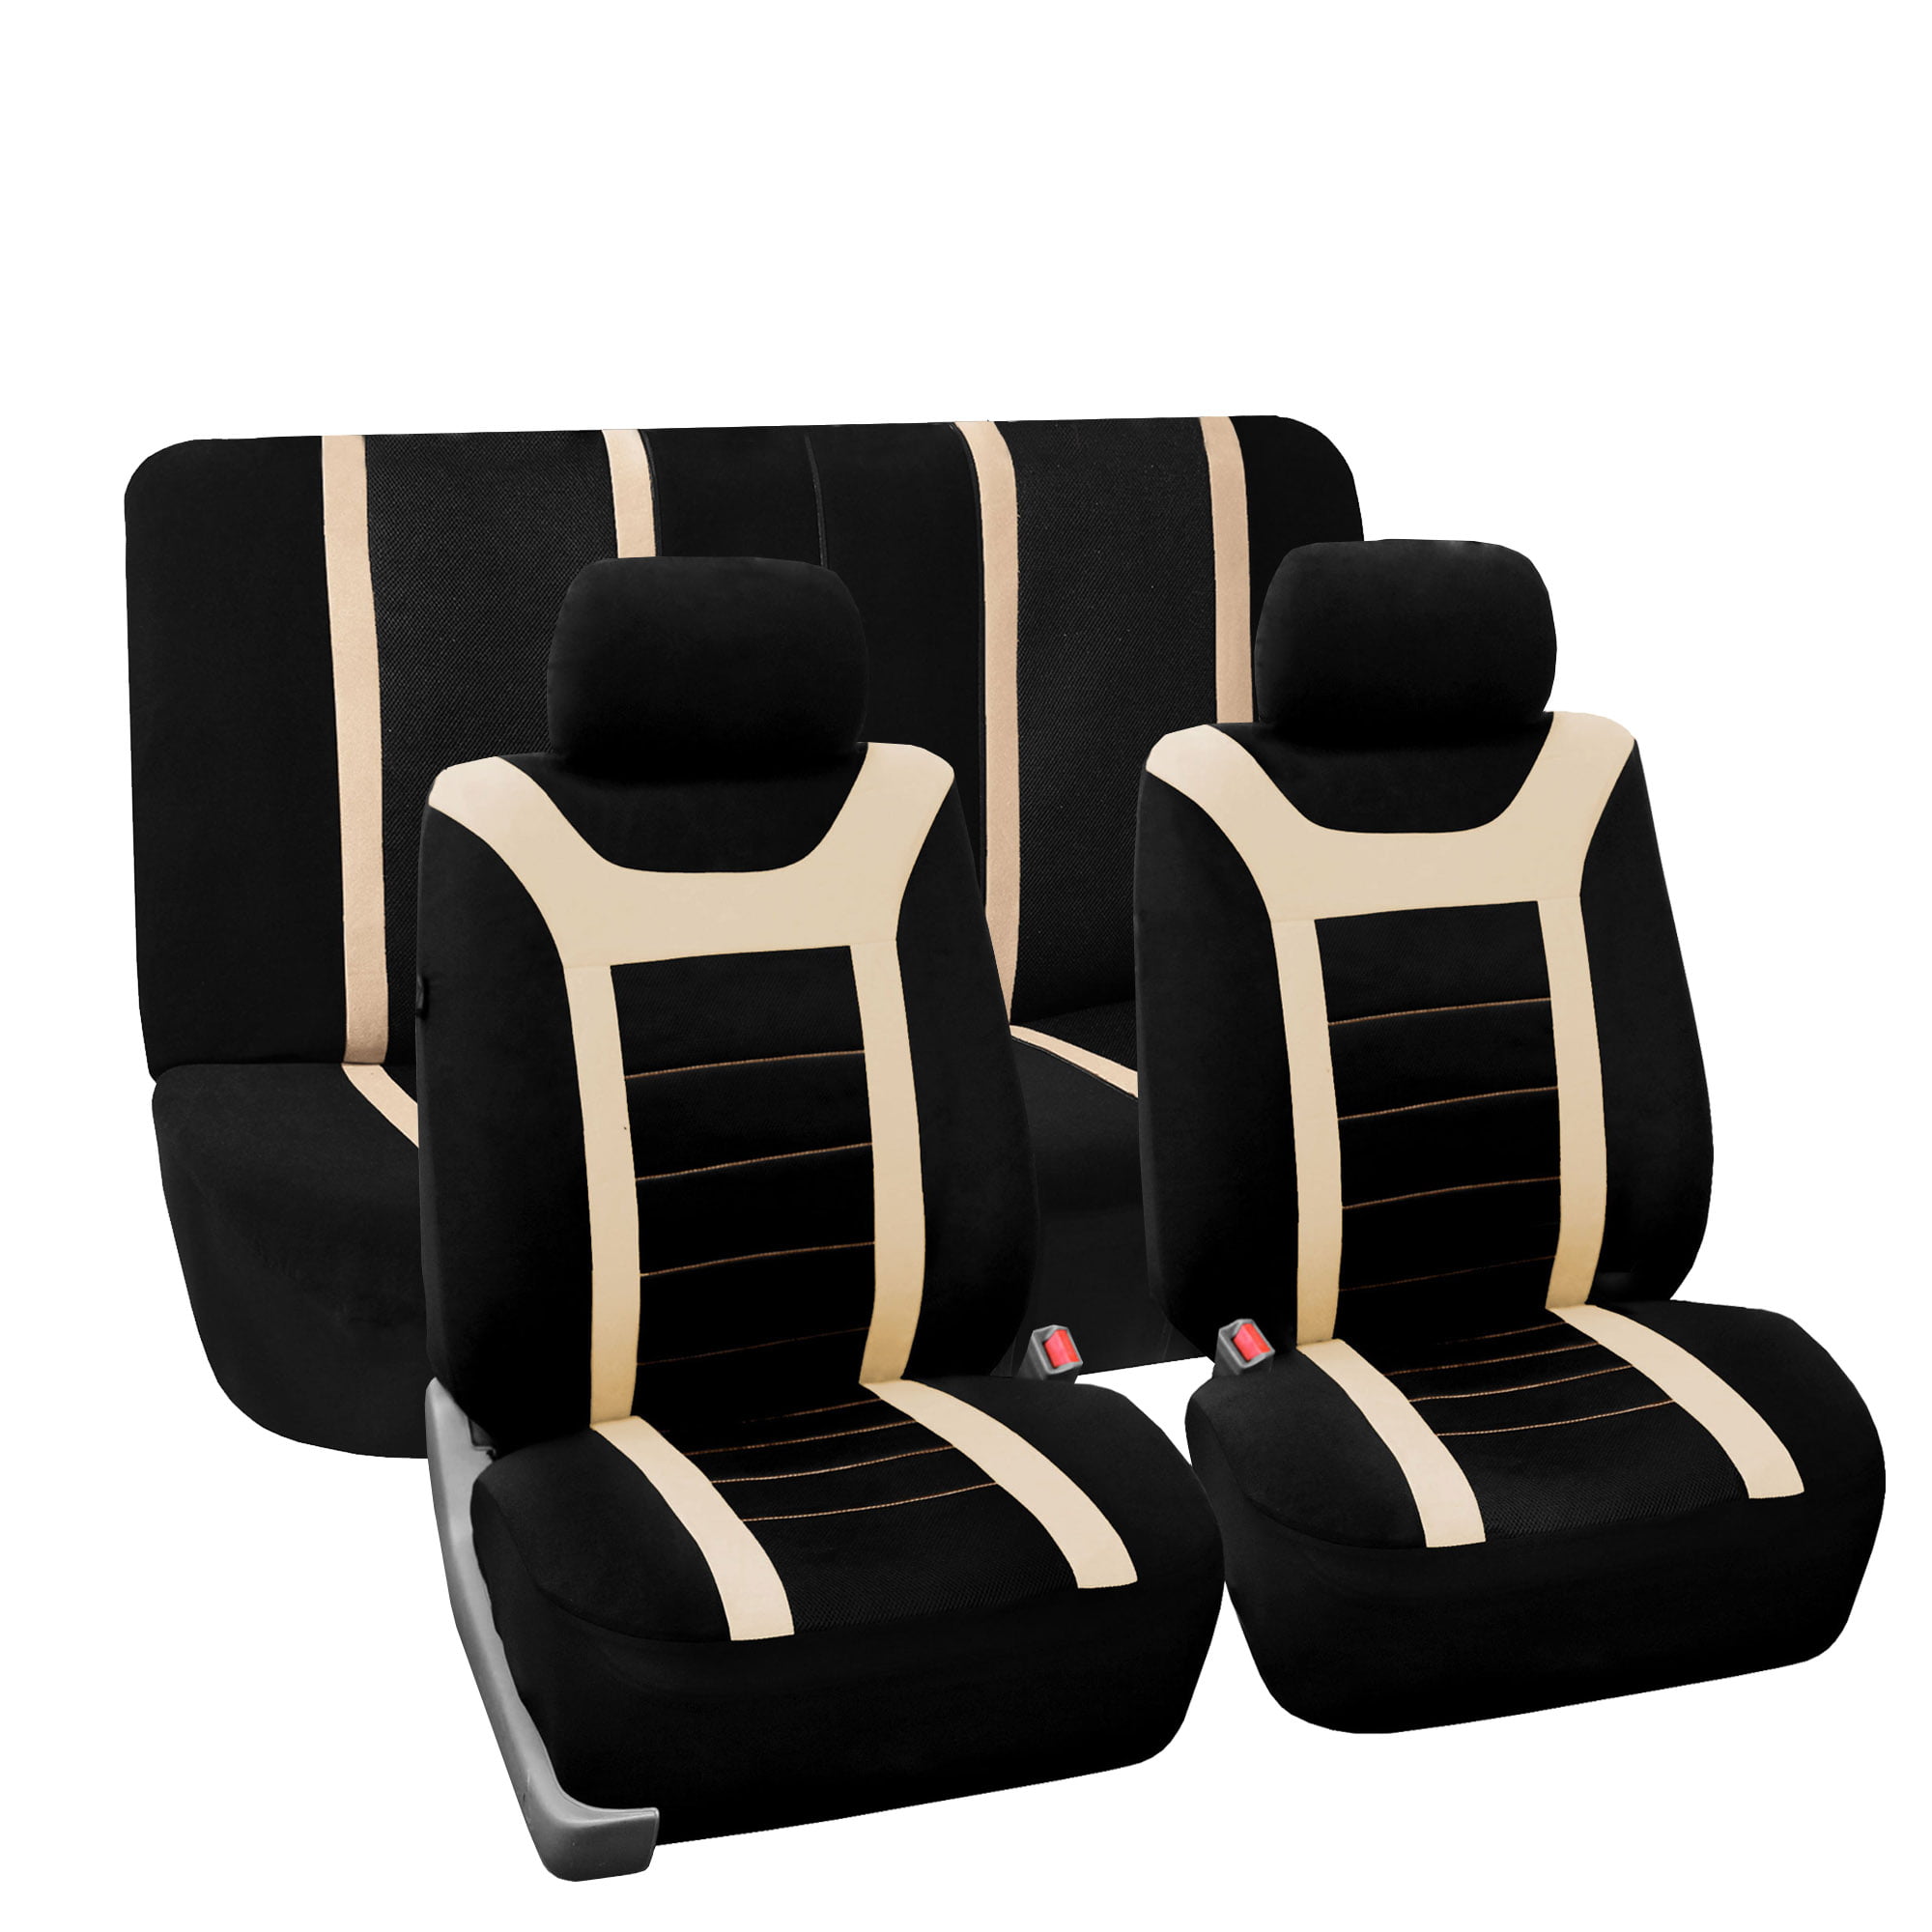 SUV Truck Fit Most Car or Van Airbag Compatible and Split Bench FH Group FH-FB063115 Full Set Sports Fabric Car Seat Covers Solid Black 